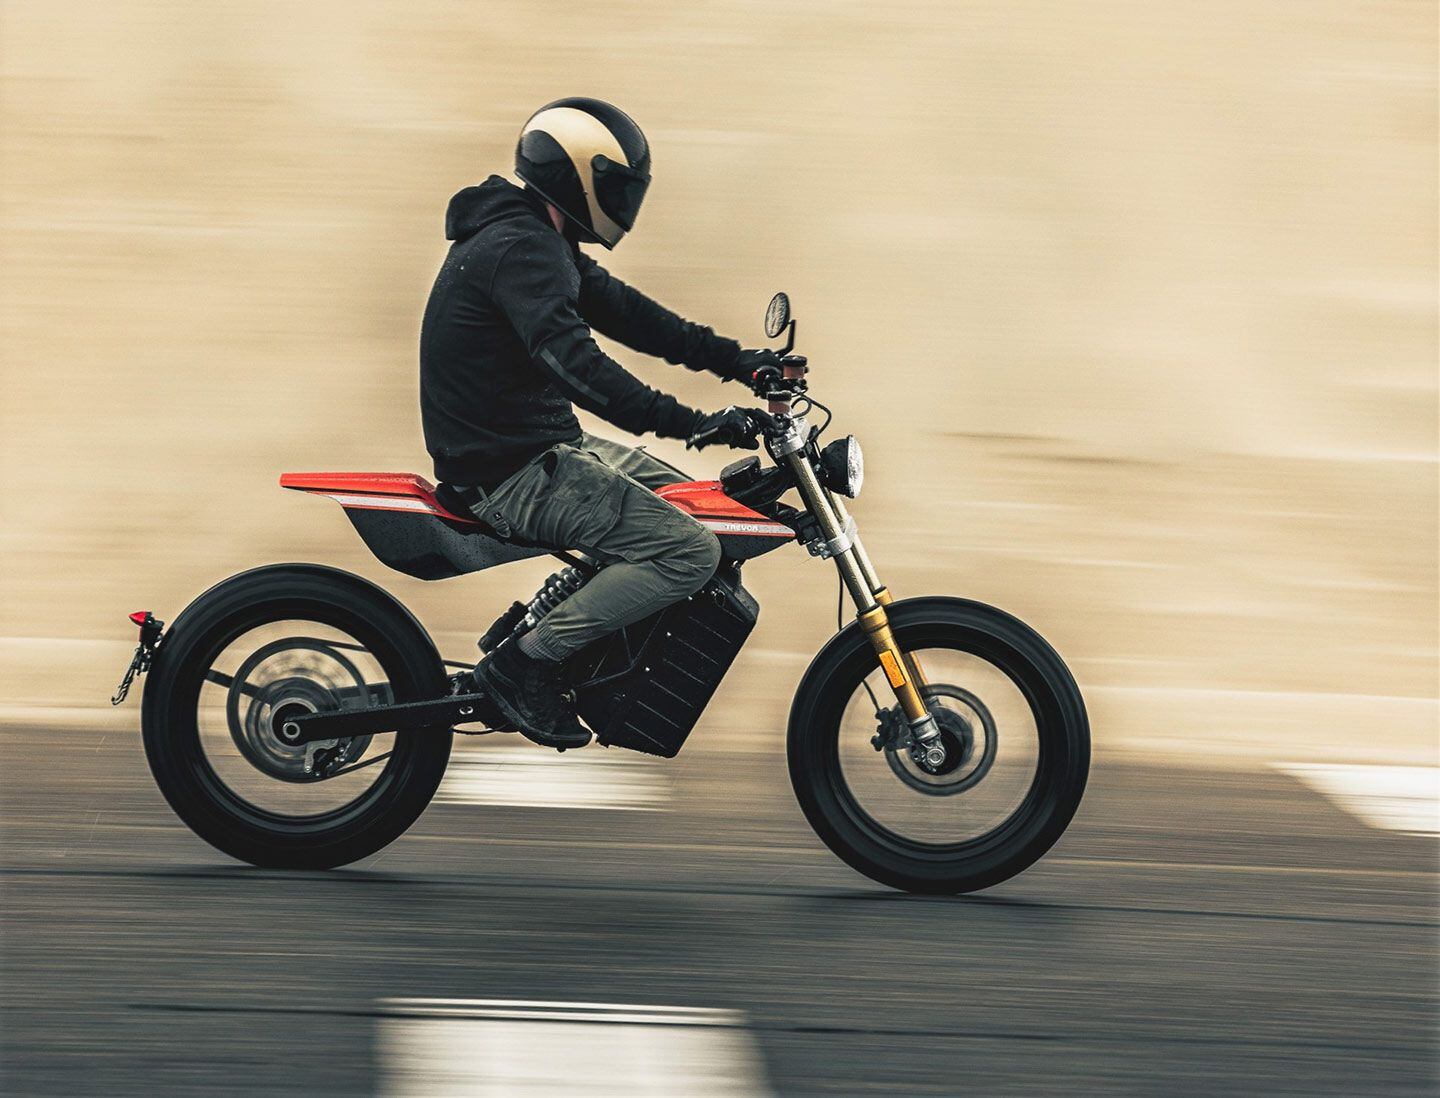 Big on style and adequate on power, the Belgian-born Stella DTRe electric motorcycle is coming to the US market.